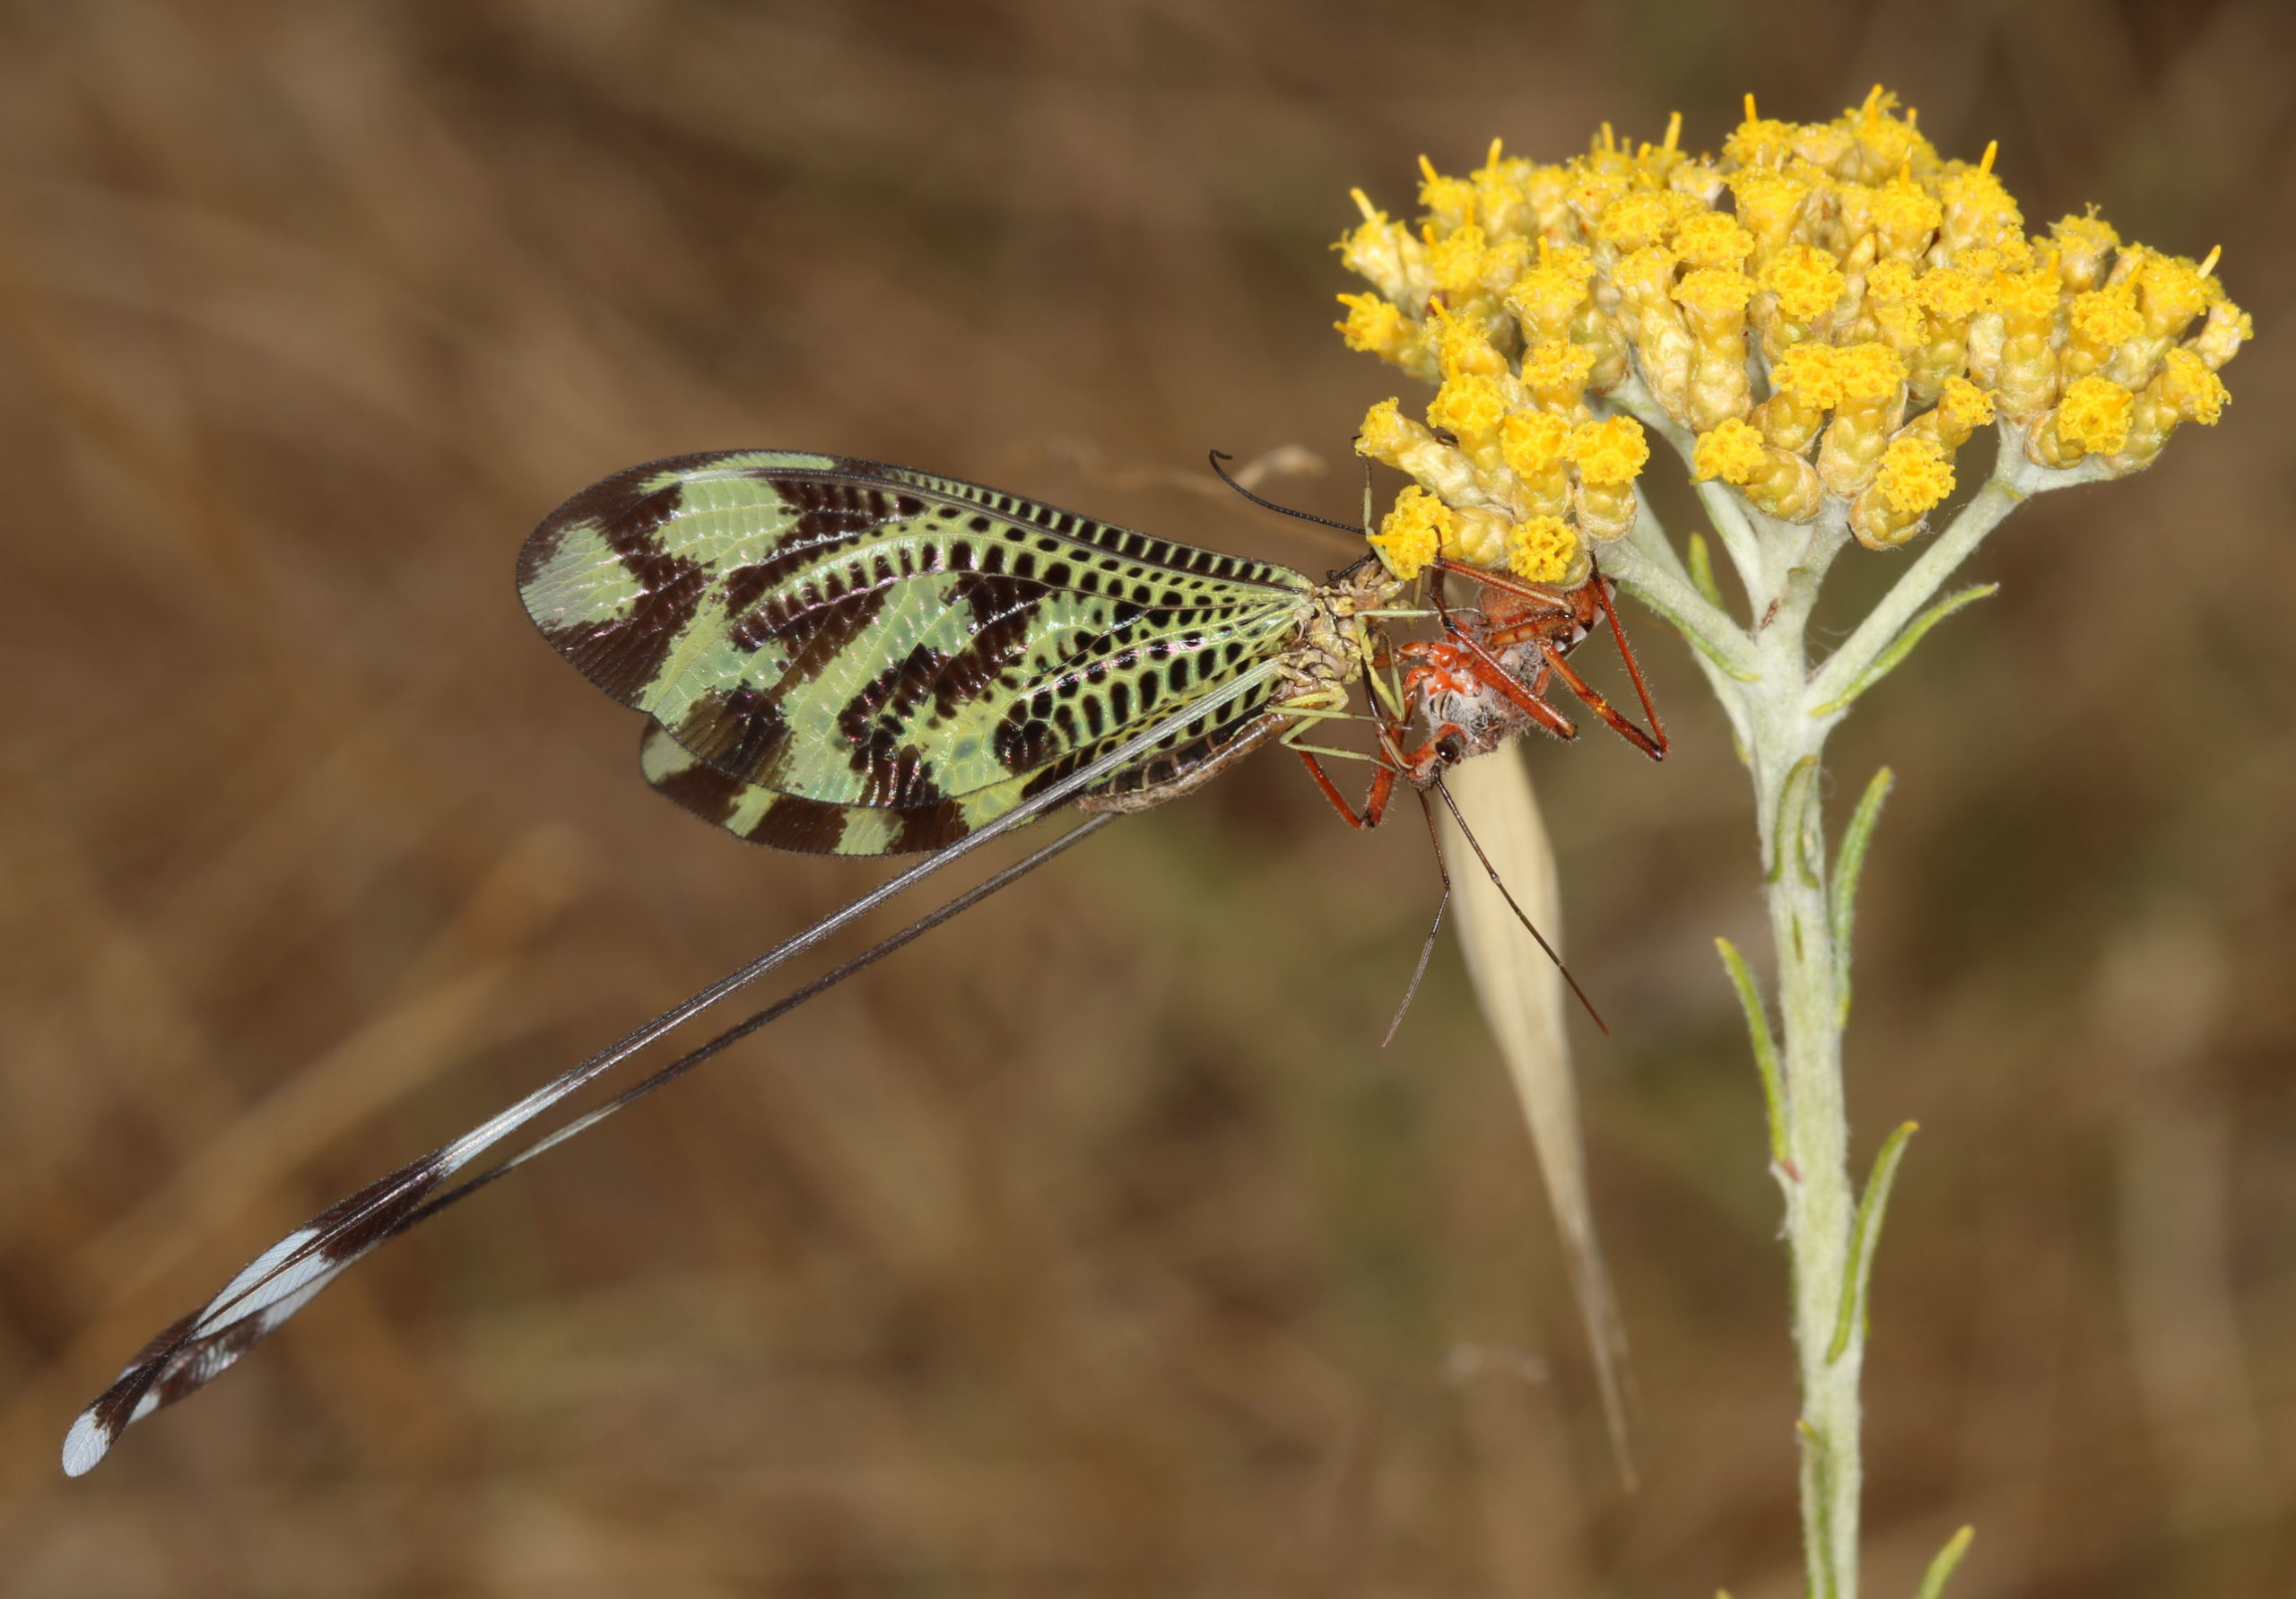 Sinuated Spoonwing, Nemoptera sinuata, and Rhinocoris iracundus on a plant with small yellow flowers